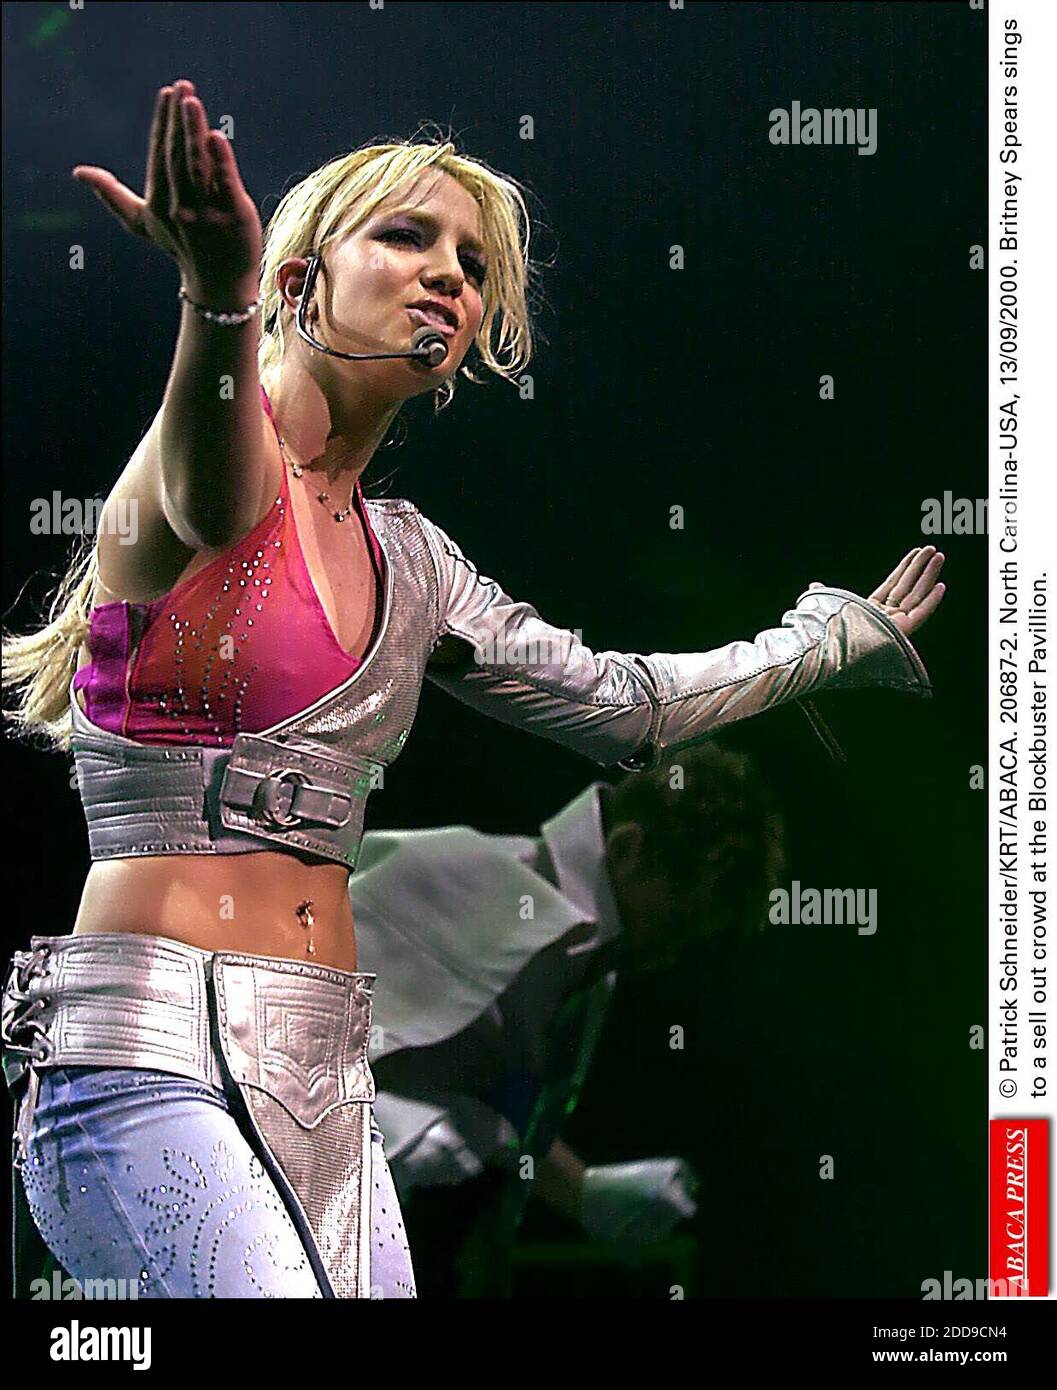 NO FILM, NO VIDEO, NO TV, NO DOCUMENTARY - © Patrick Schneider/KRT/ABACA. 20687-2. North Carolina-USA, 13/09/2000. Britney Spears sings to a sell out crowd at the Blockbuster Pavillion. Stock Photo